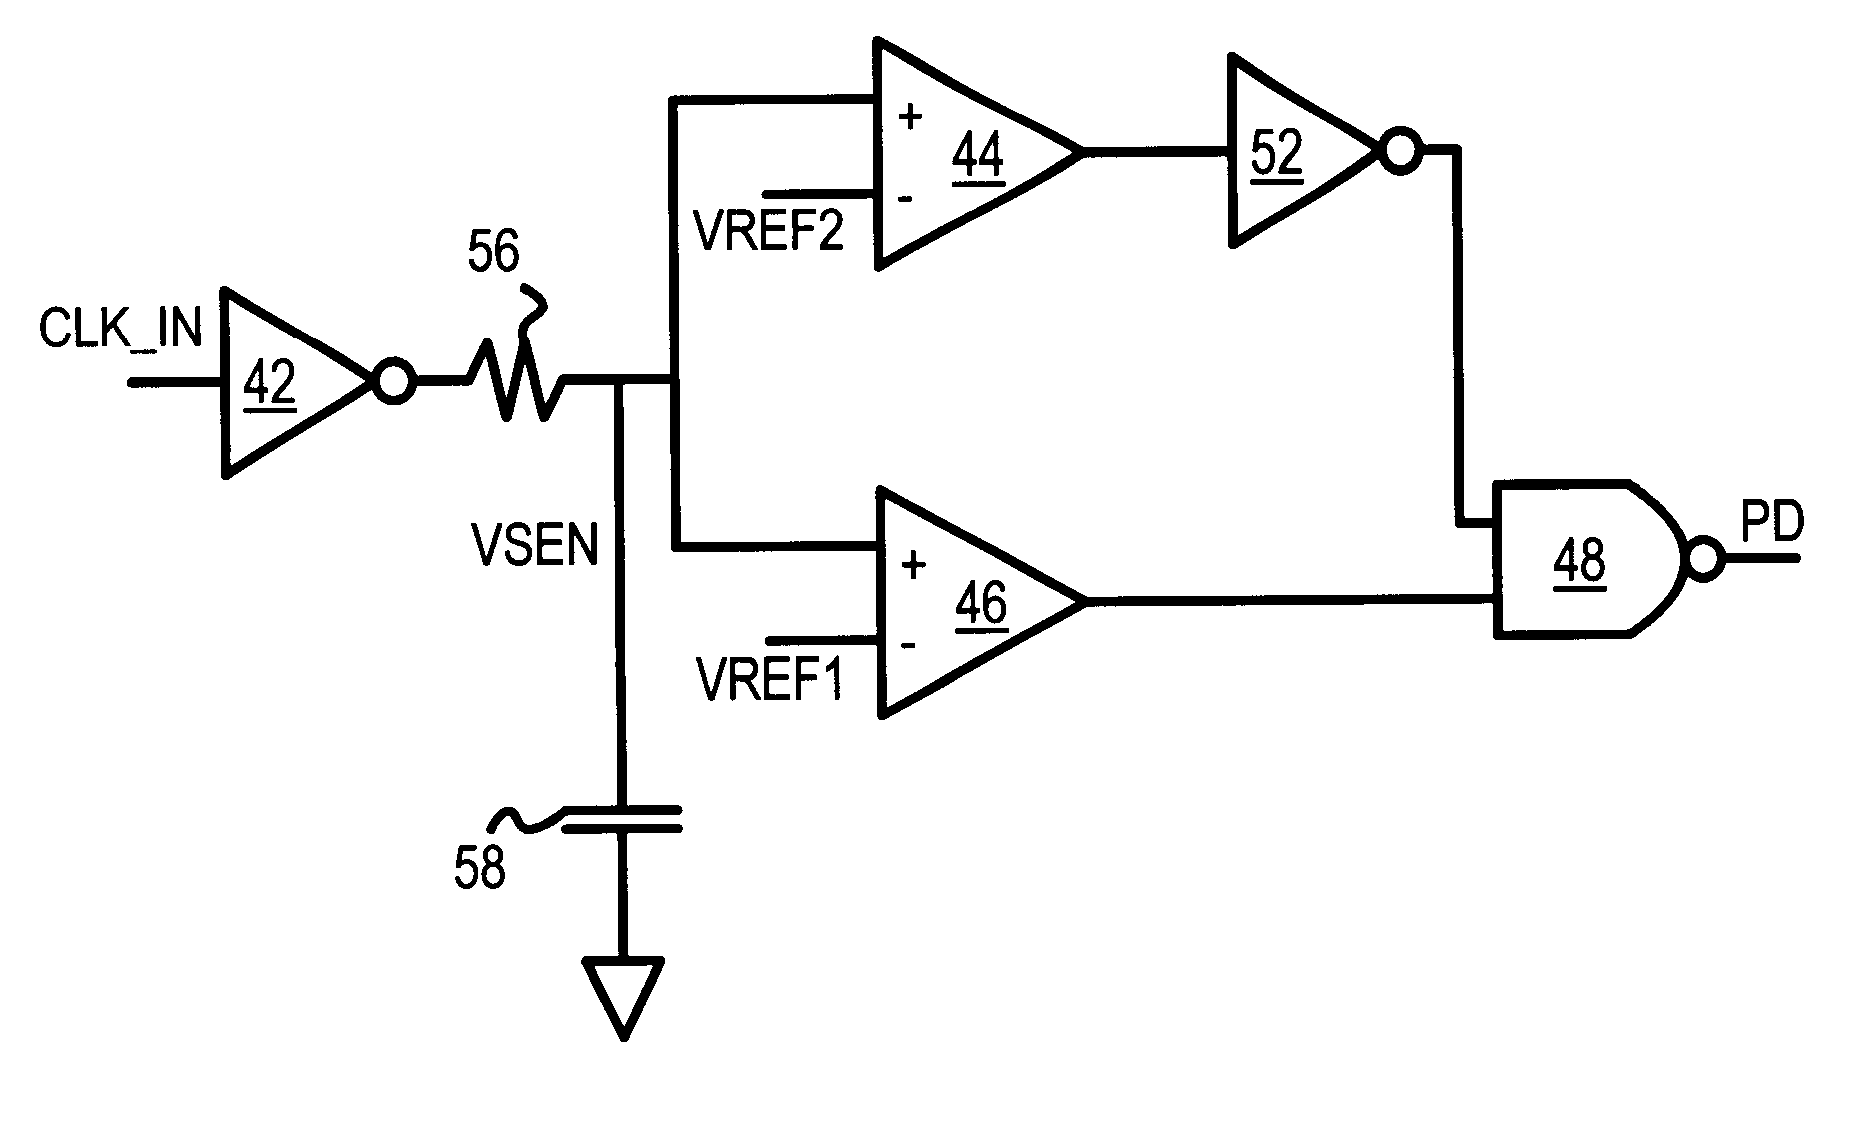 Power down circuit detecting duty cycle of input signal